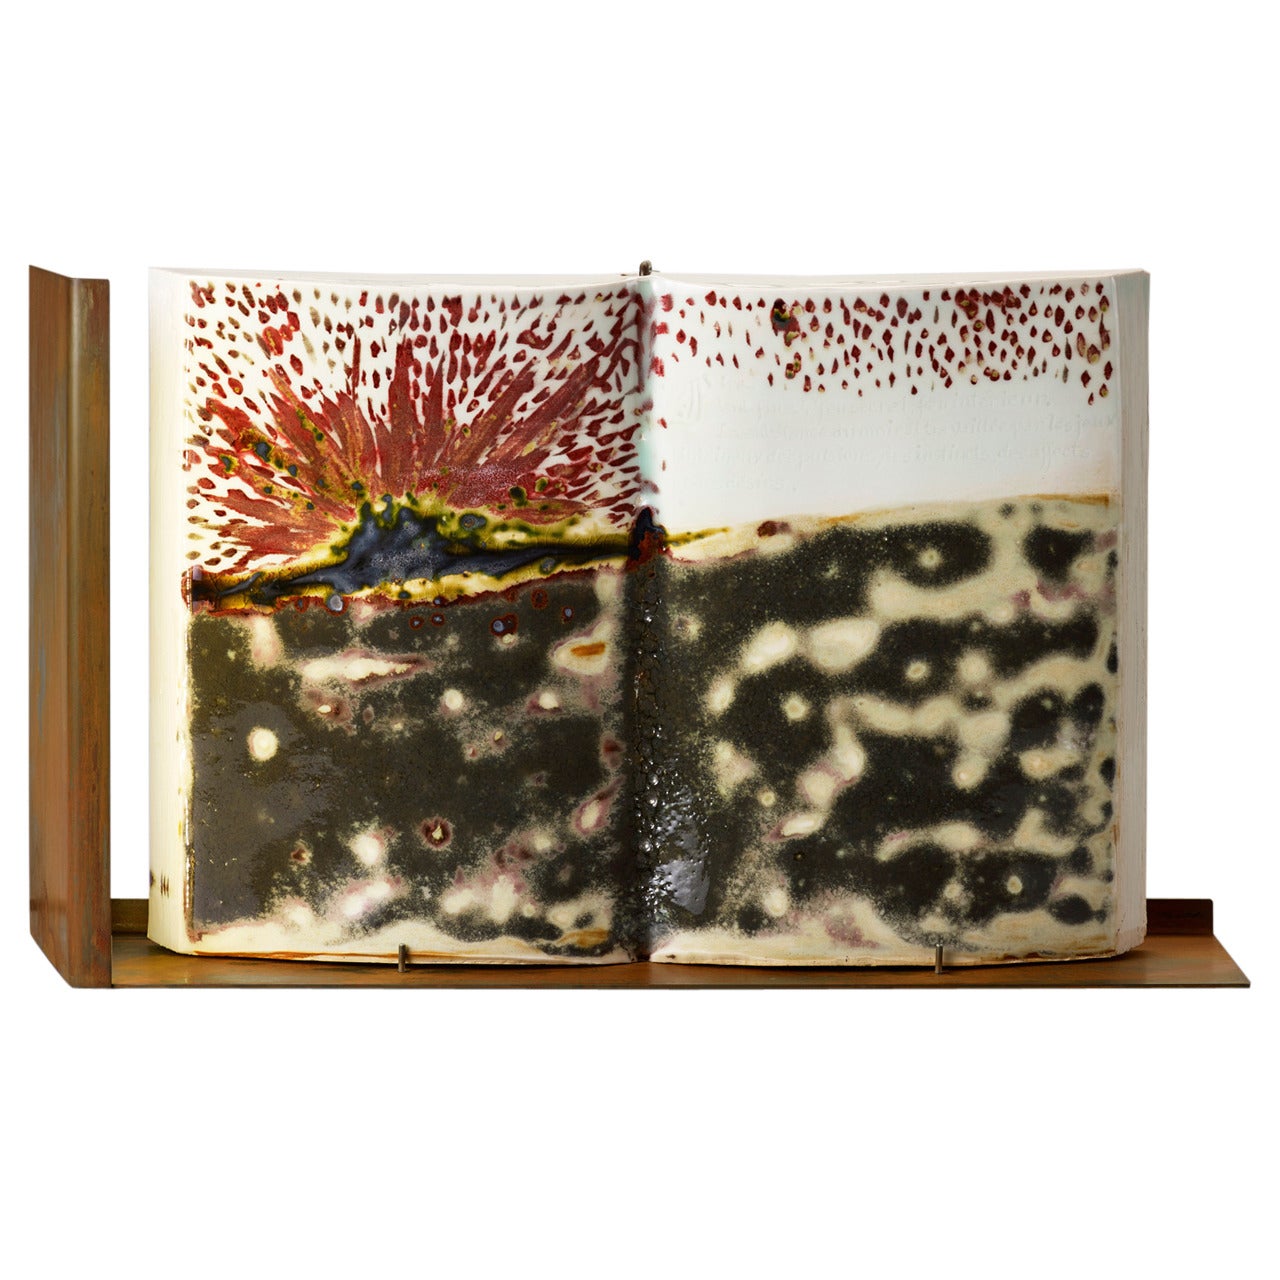 'Volcano Fire', a Unique Handmade Porcelain Book and Table Lighting Sculpture